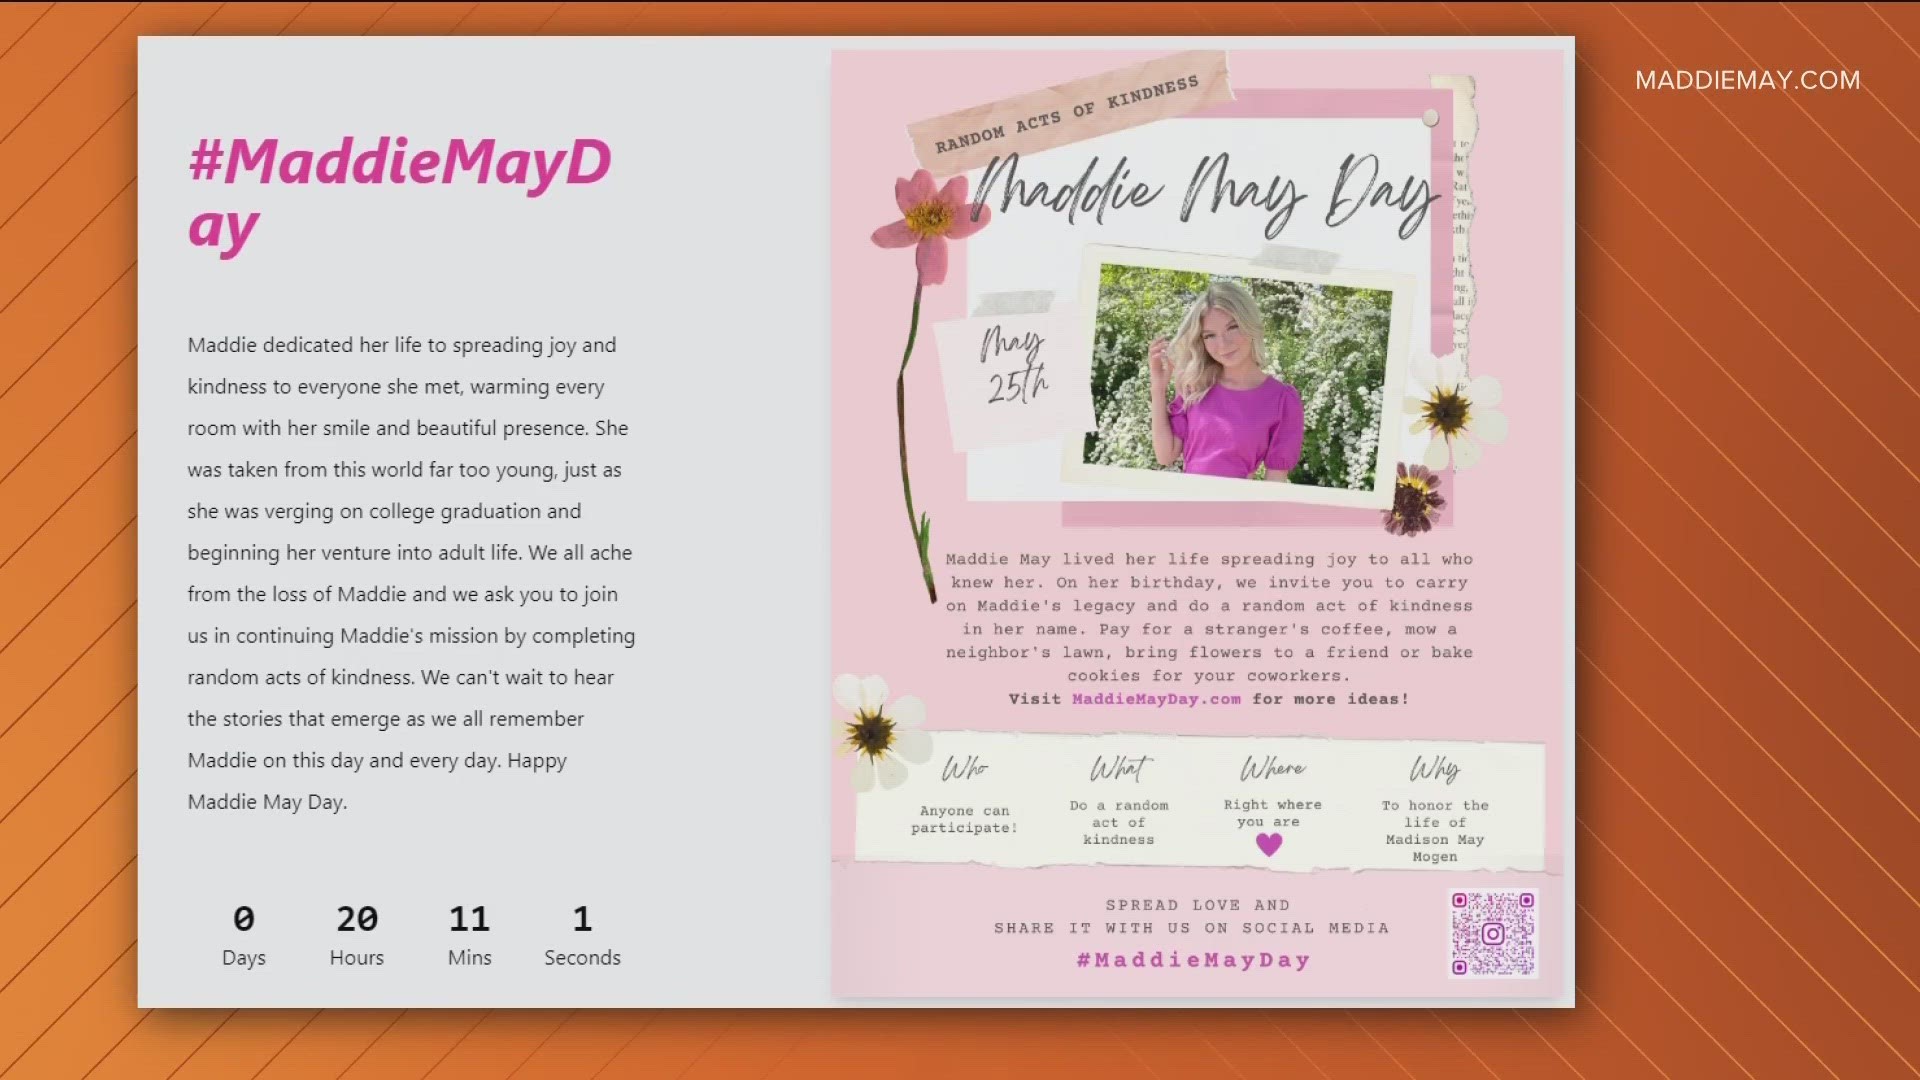 Earlier this month Madison Mogen's family announced the creation of Maddie May Day, urging people to commit random acts of kindness in Mogen's memory every May 25.